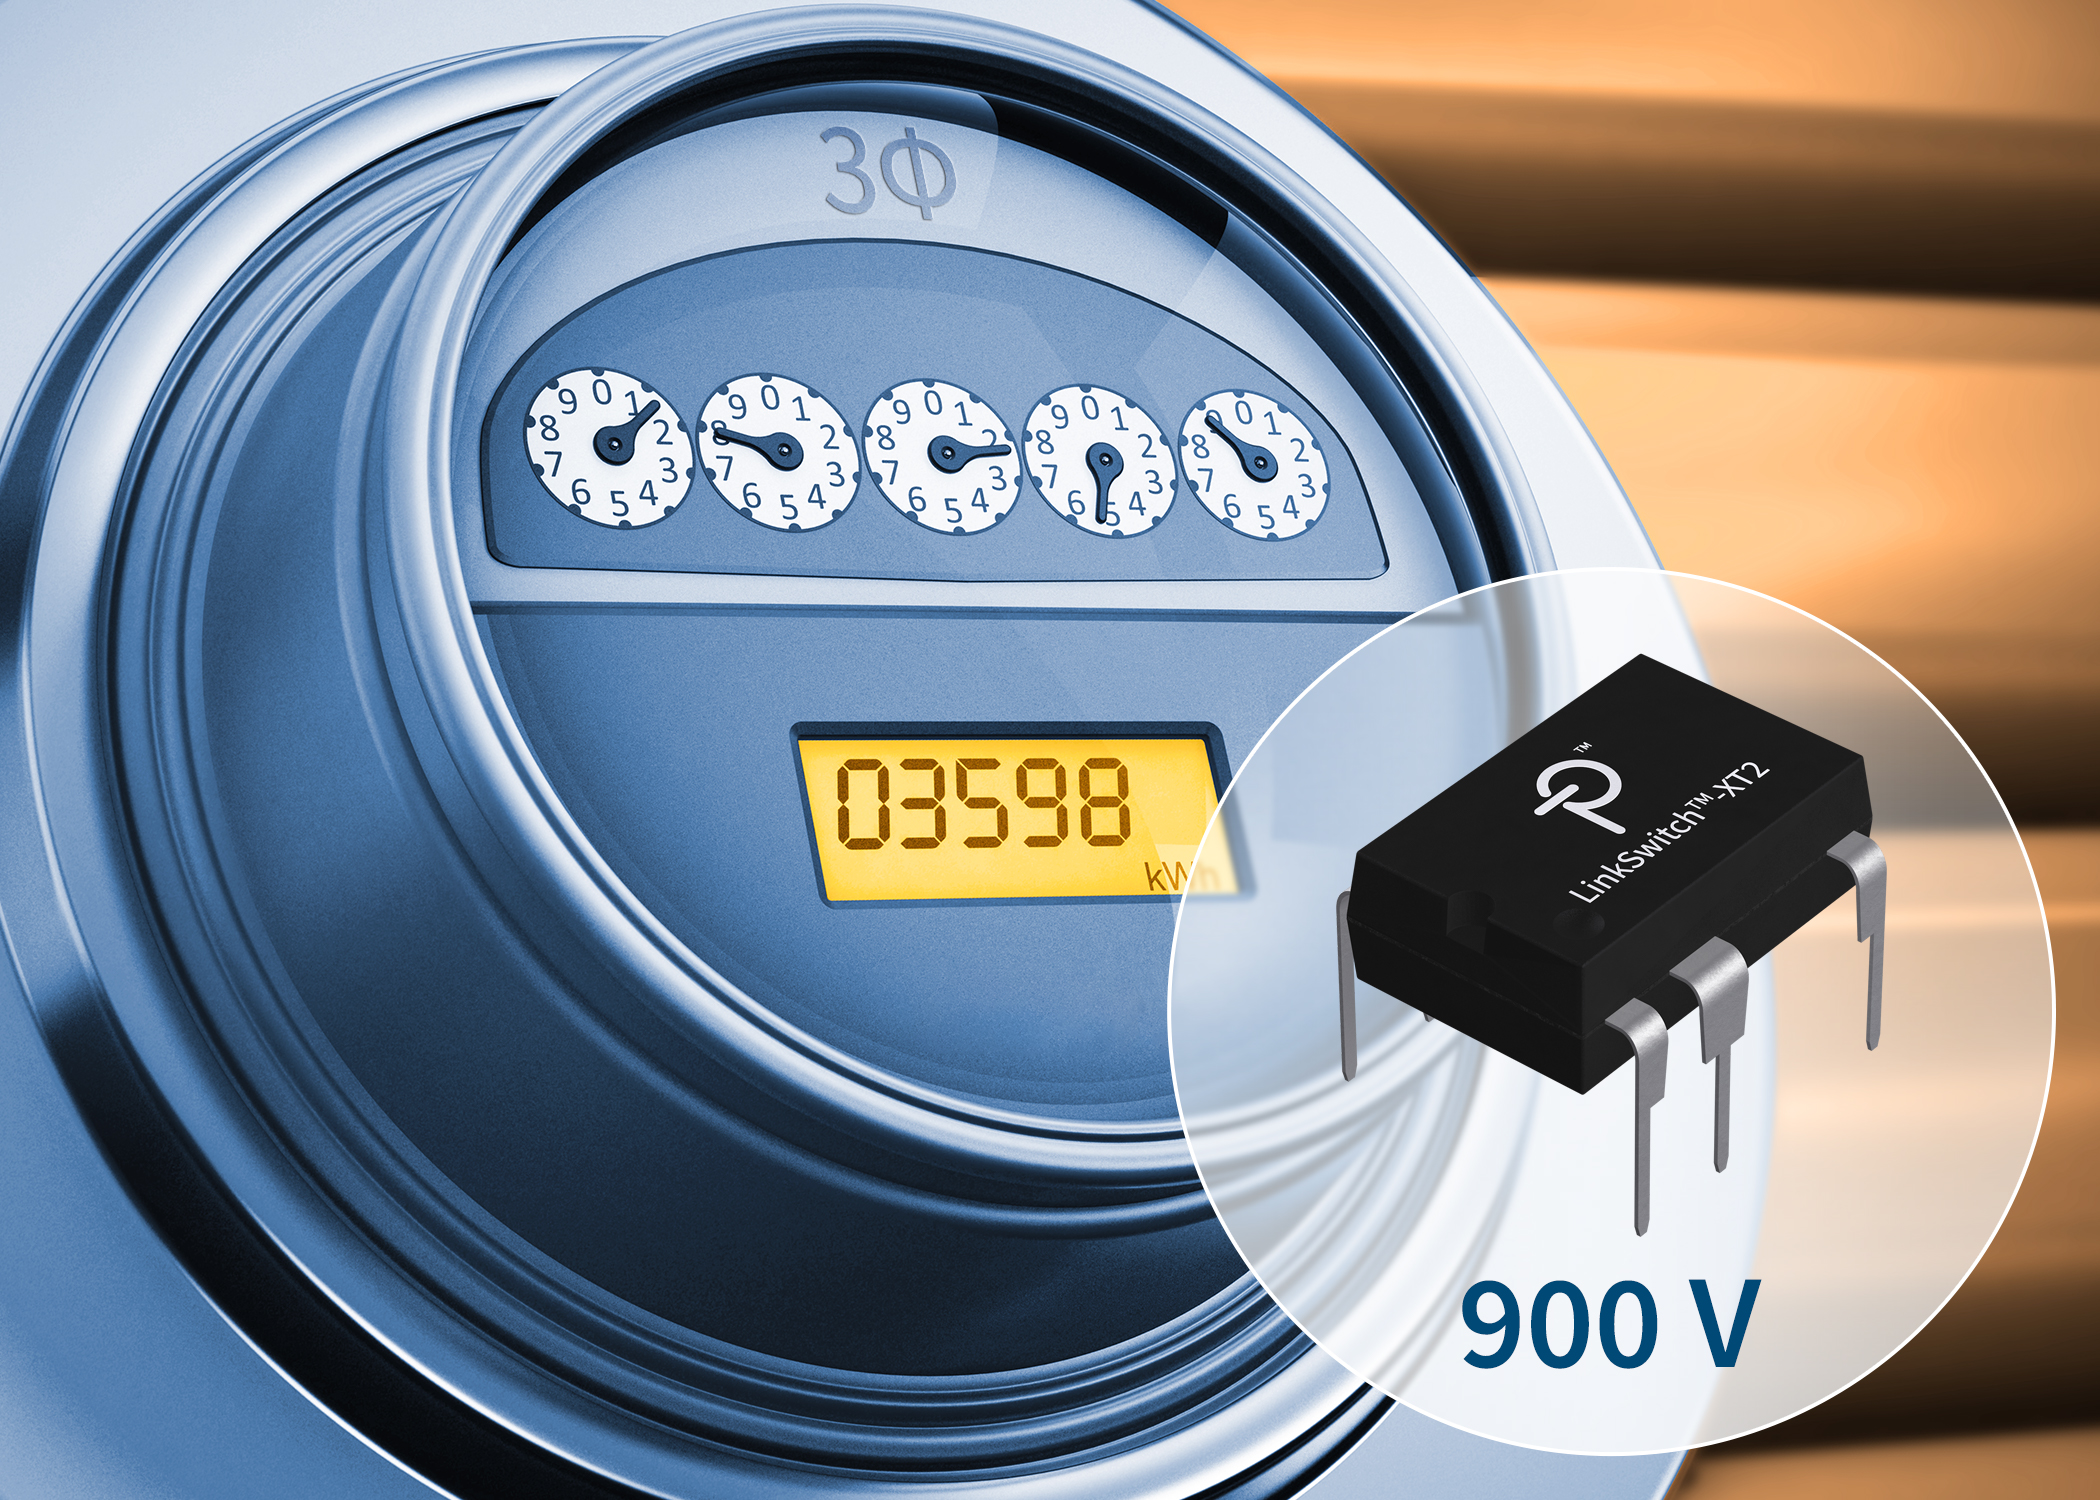 Flyback Switcher ICs with Integrated 900 V MOSFETs